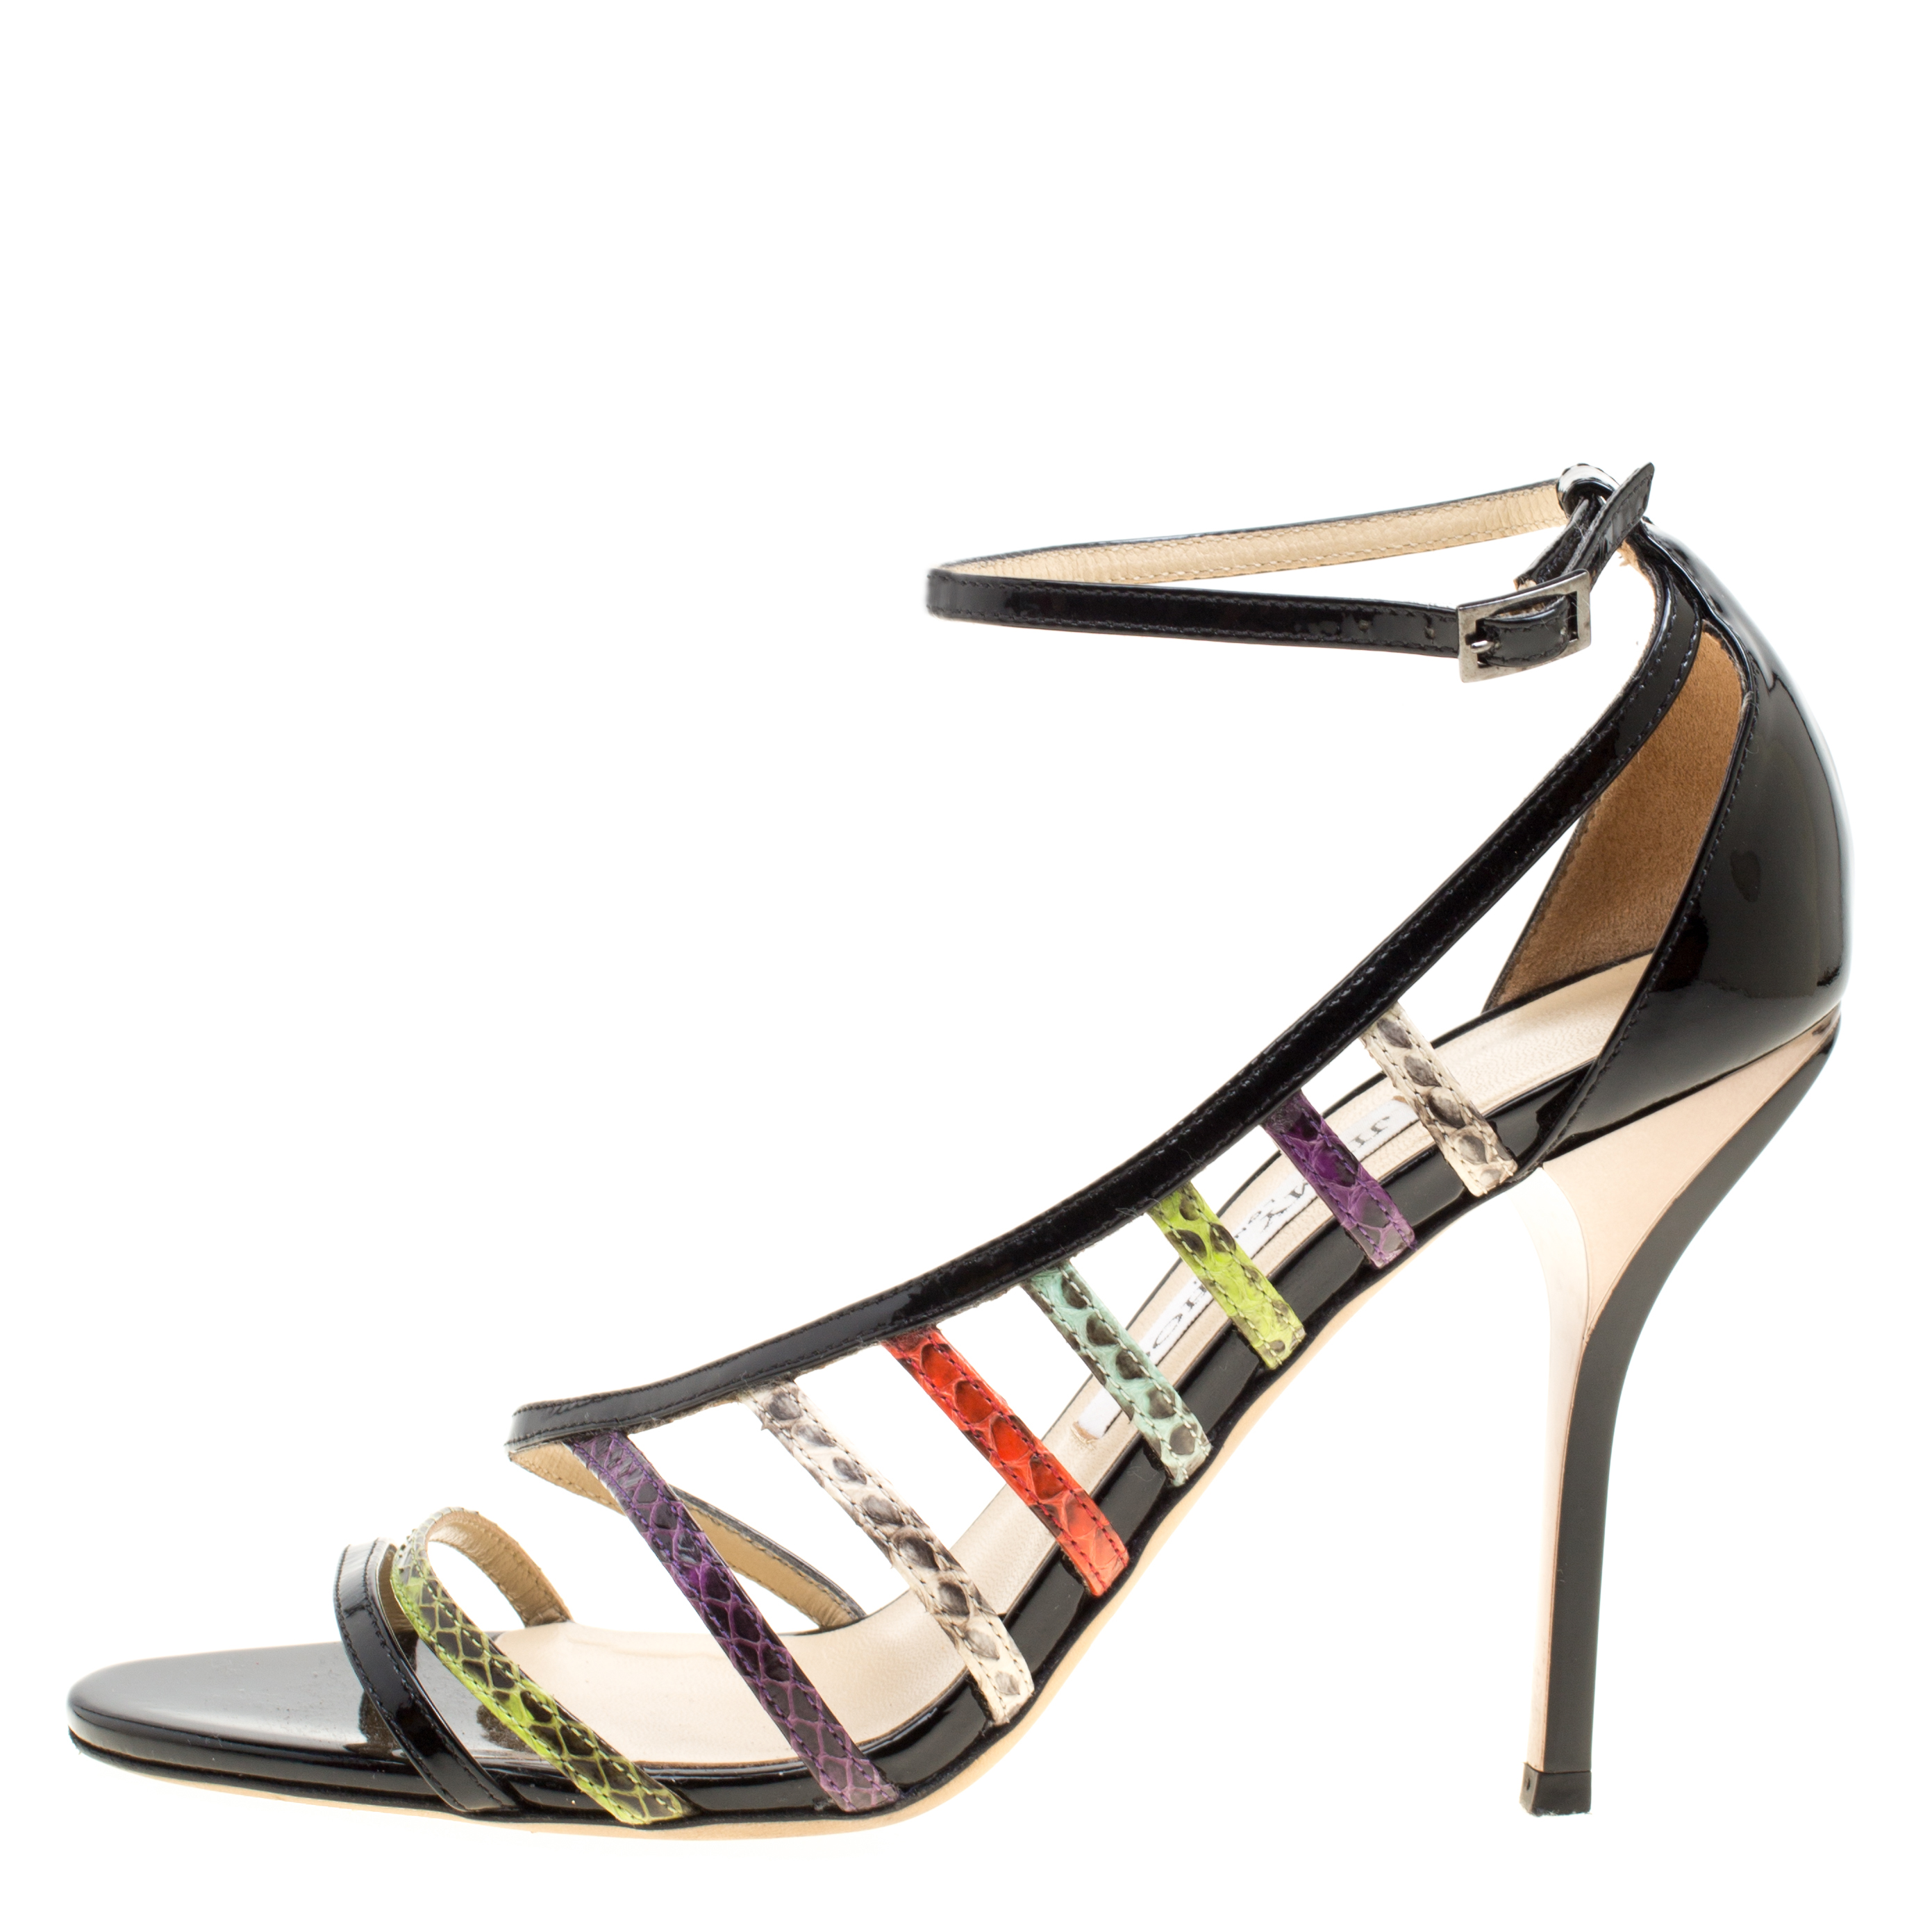 

Jimmy Choo Multicolor/Black Snakeskin and Patent Leather Strappy Sandals Size